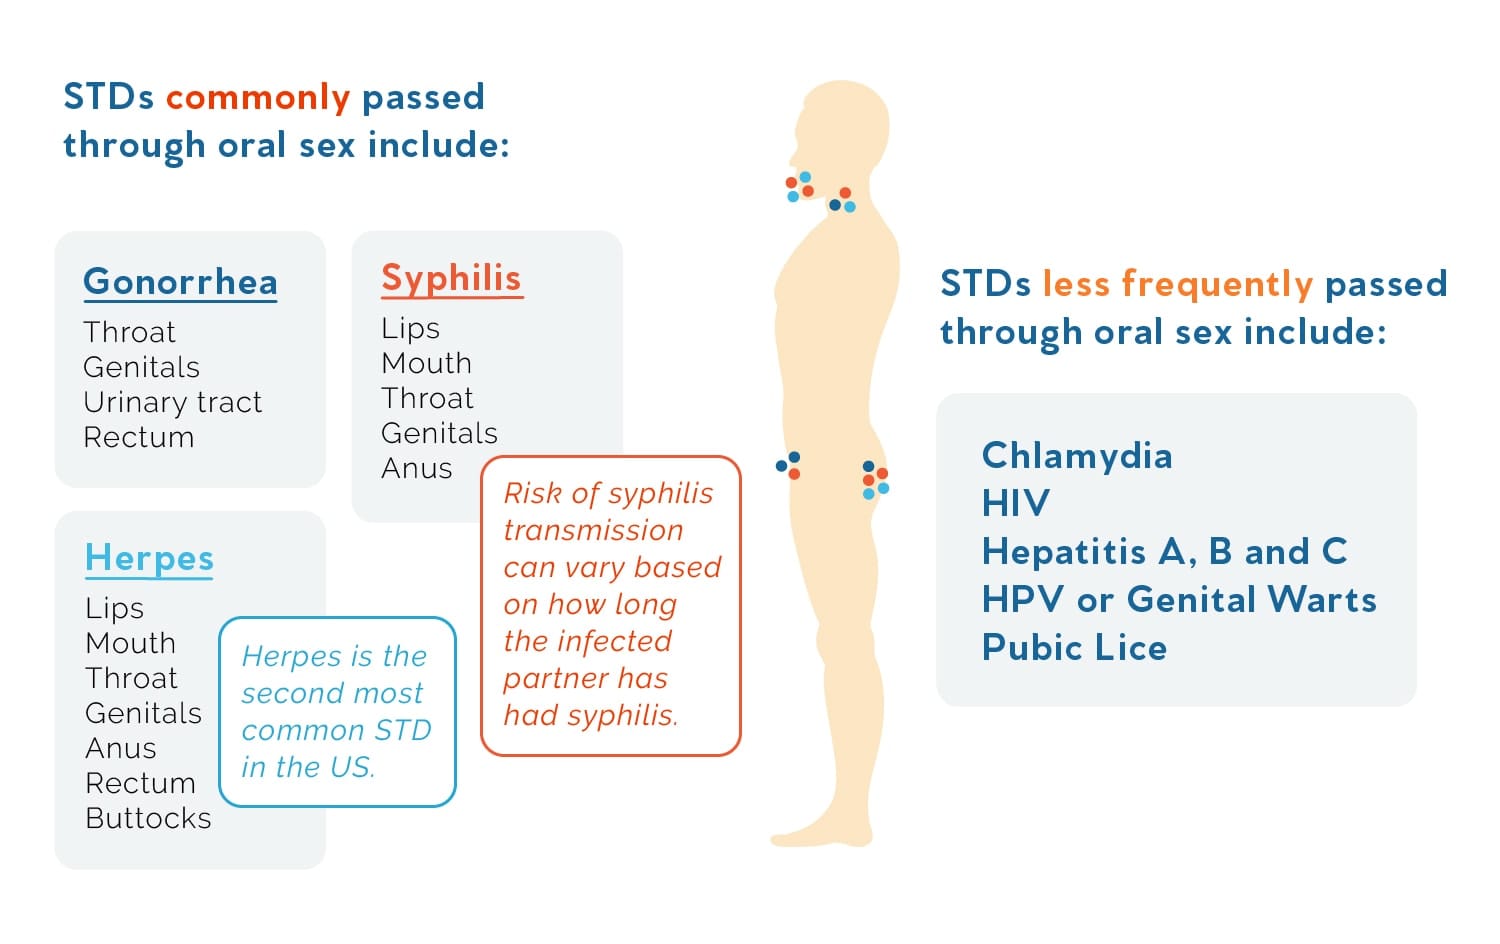 Does oral sex cause hiv. Causes of HIV ...